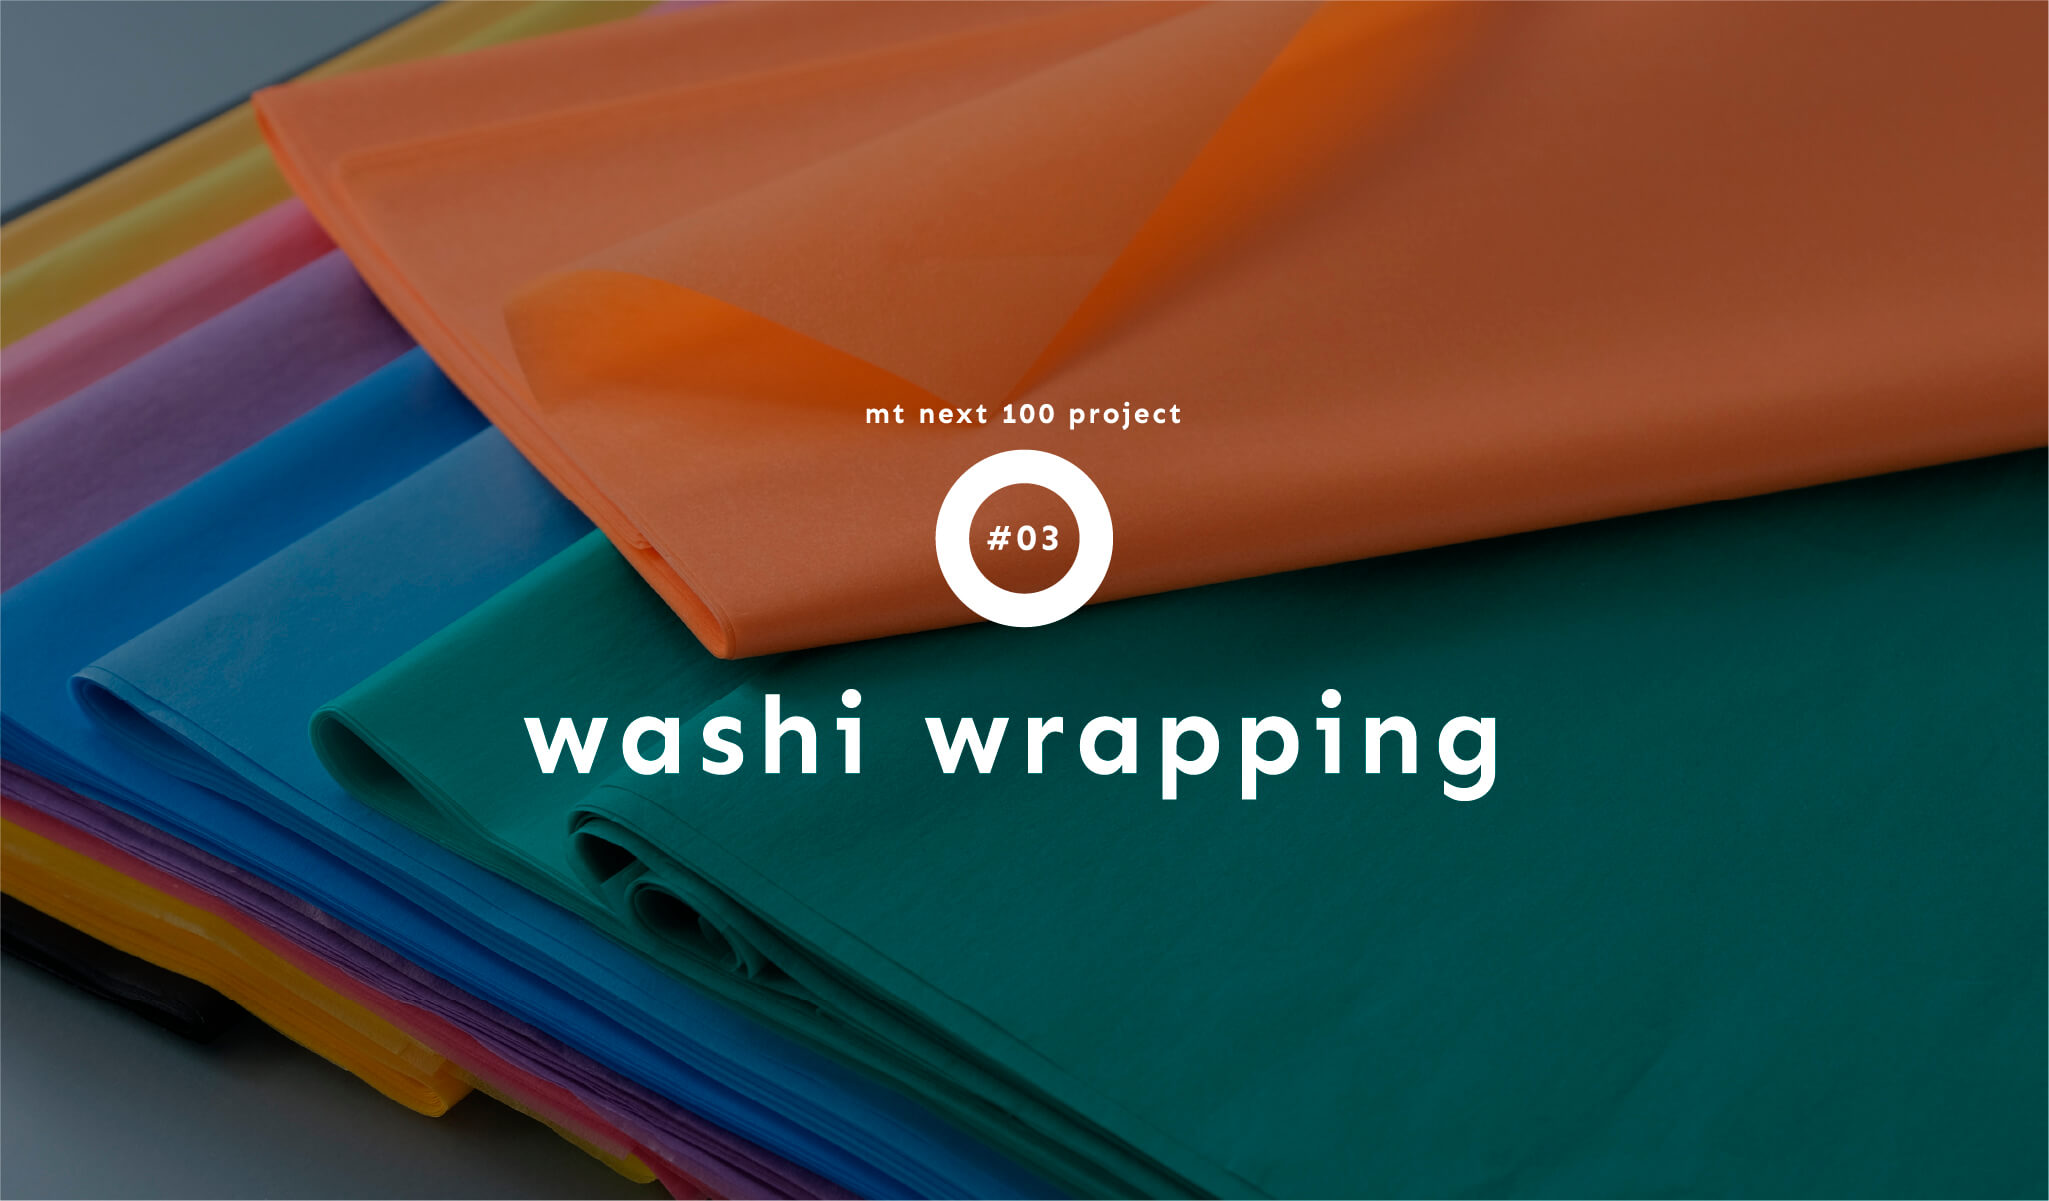 mt NEXT100 washi wrapping